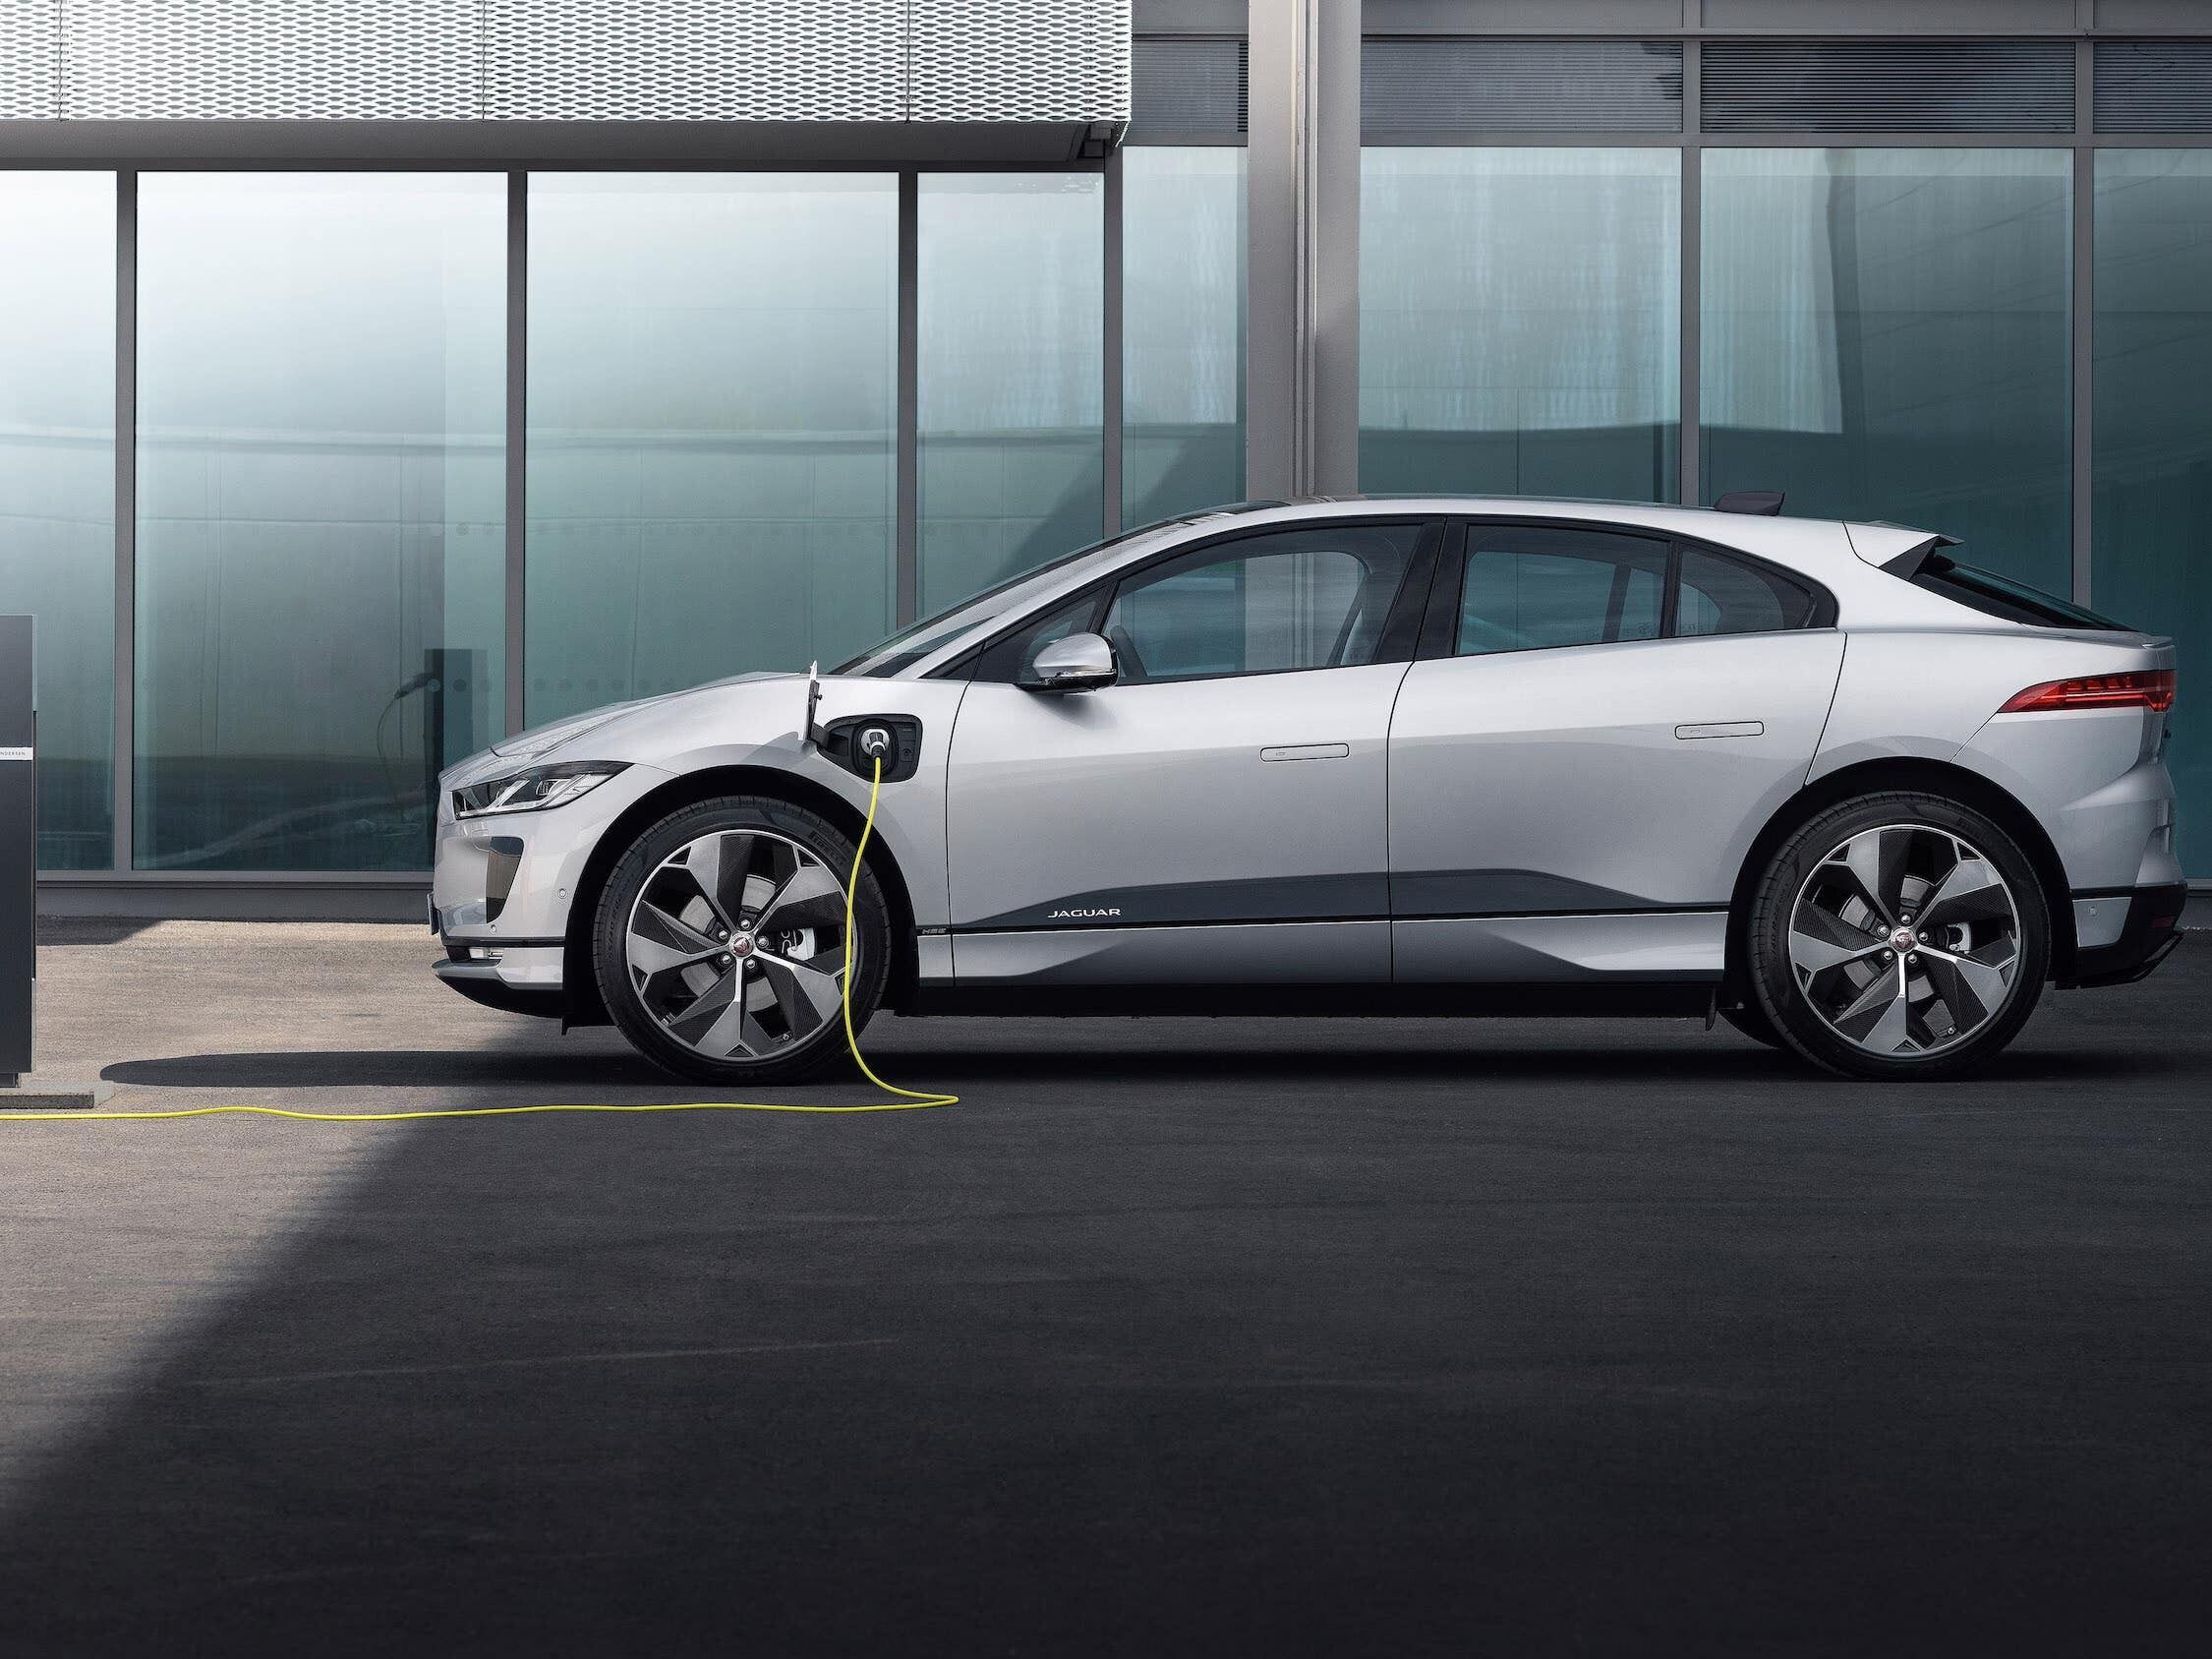 Jaguar I-Pace EV batteries to get second life in portable energy storage systems